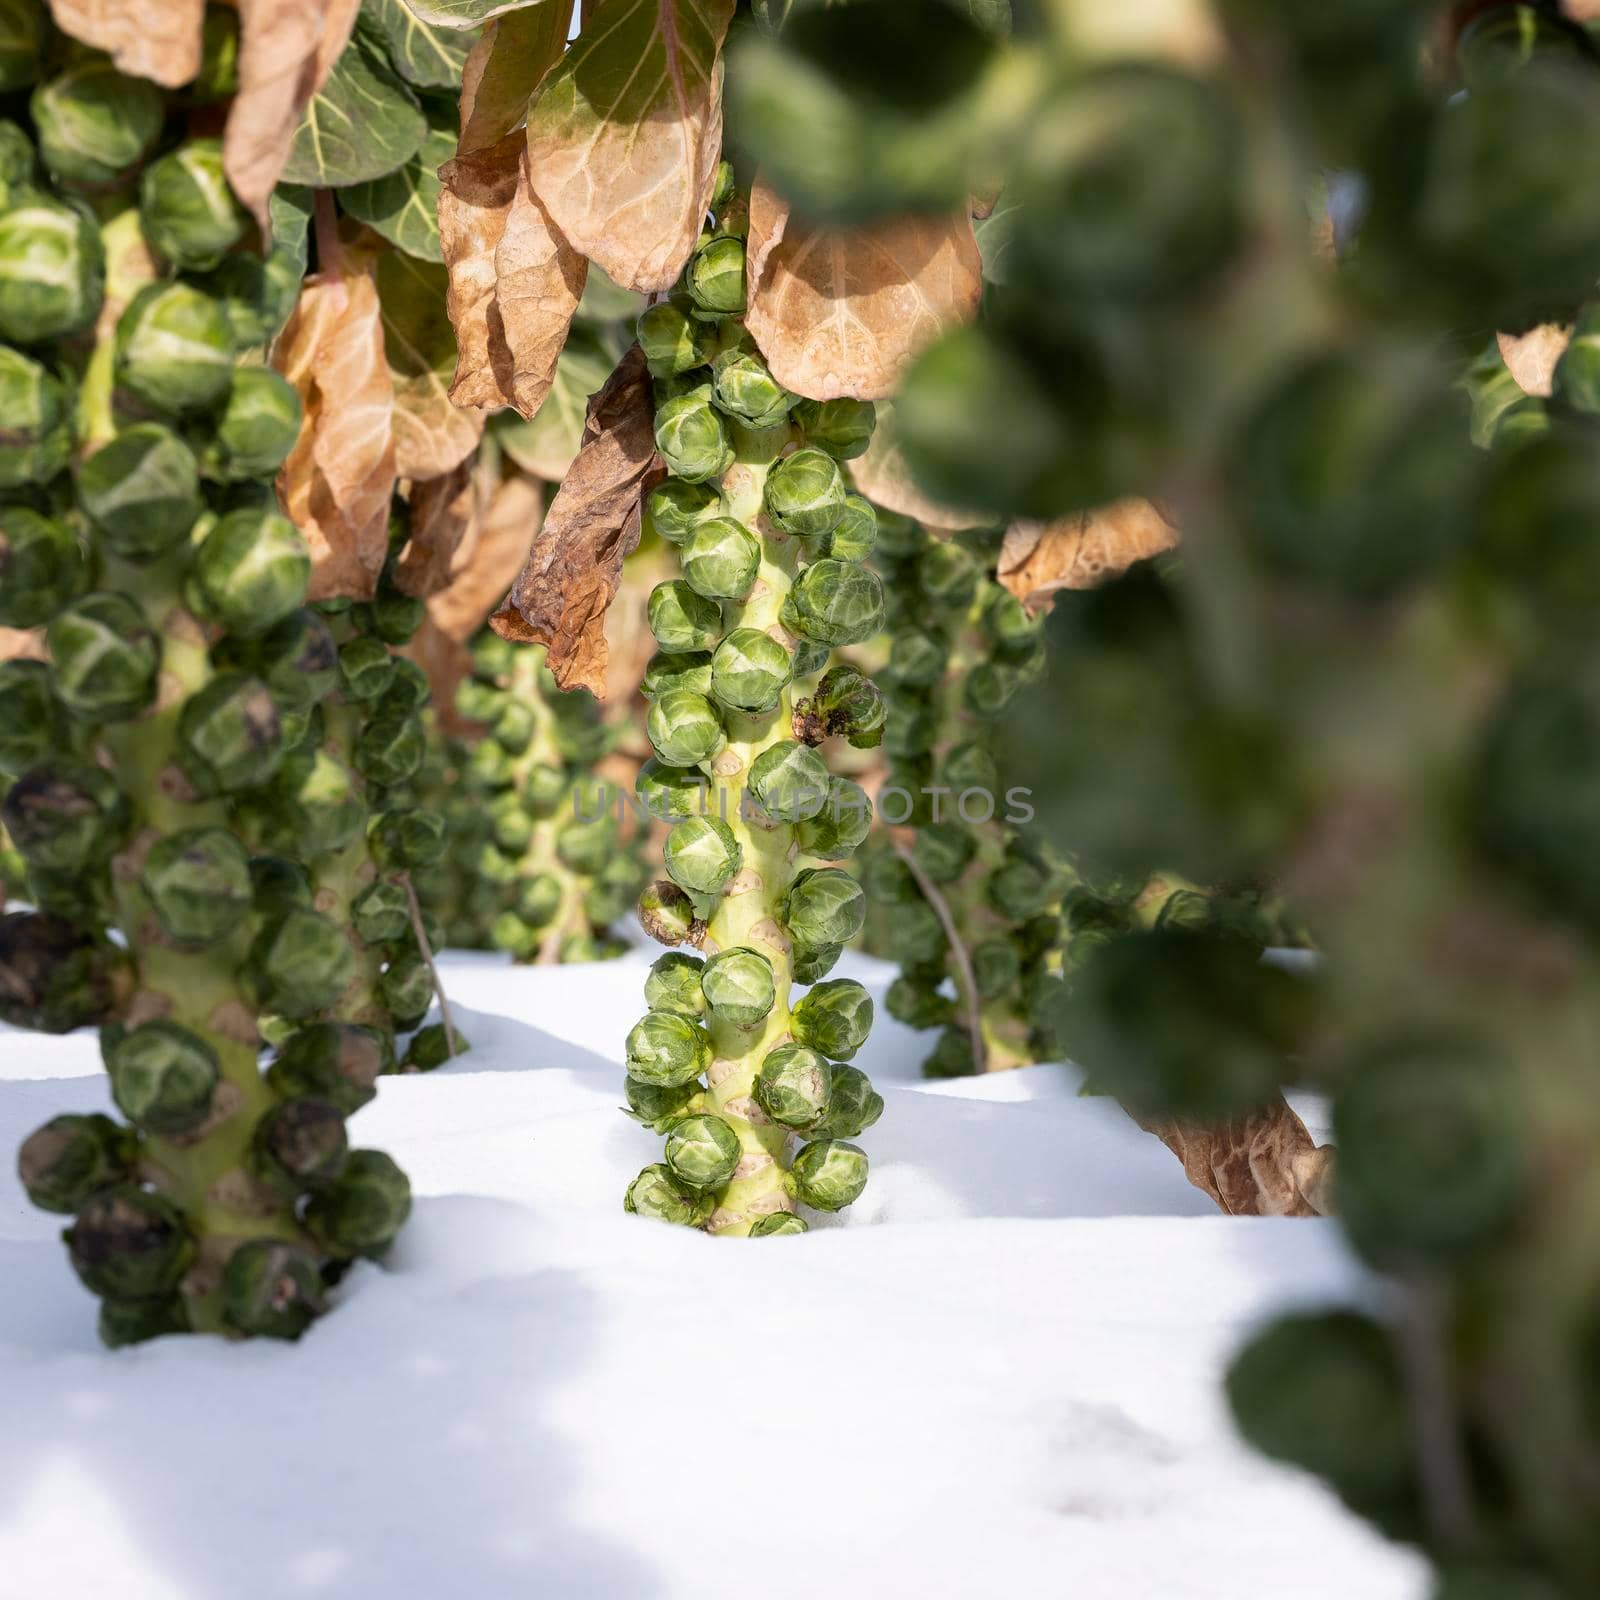 closeup of brussels sprouts in winter field with snow